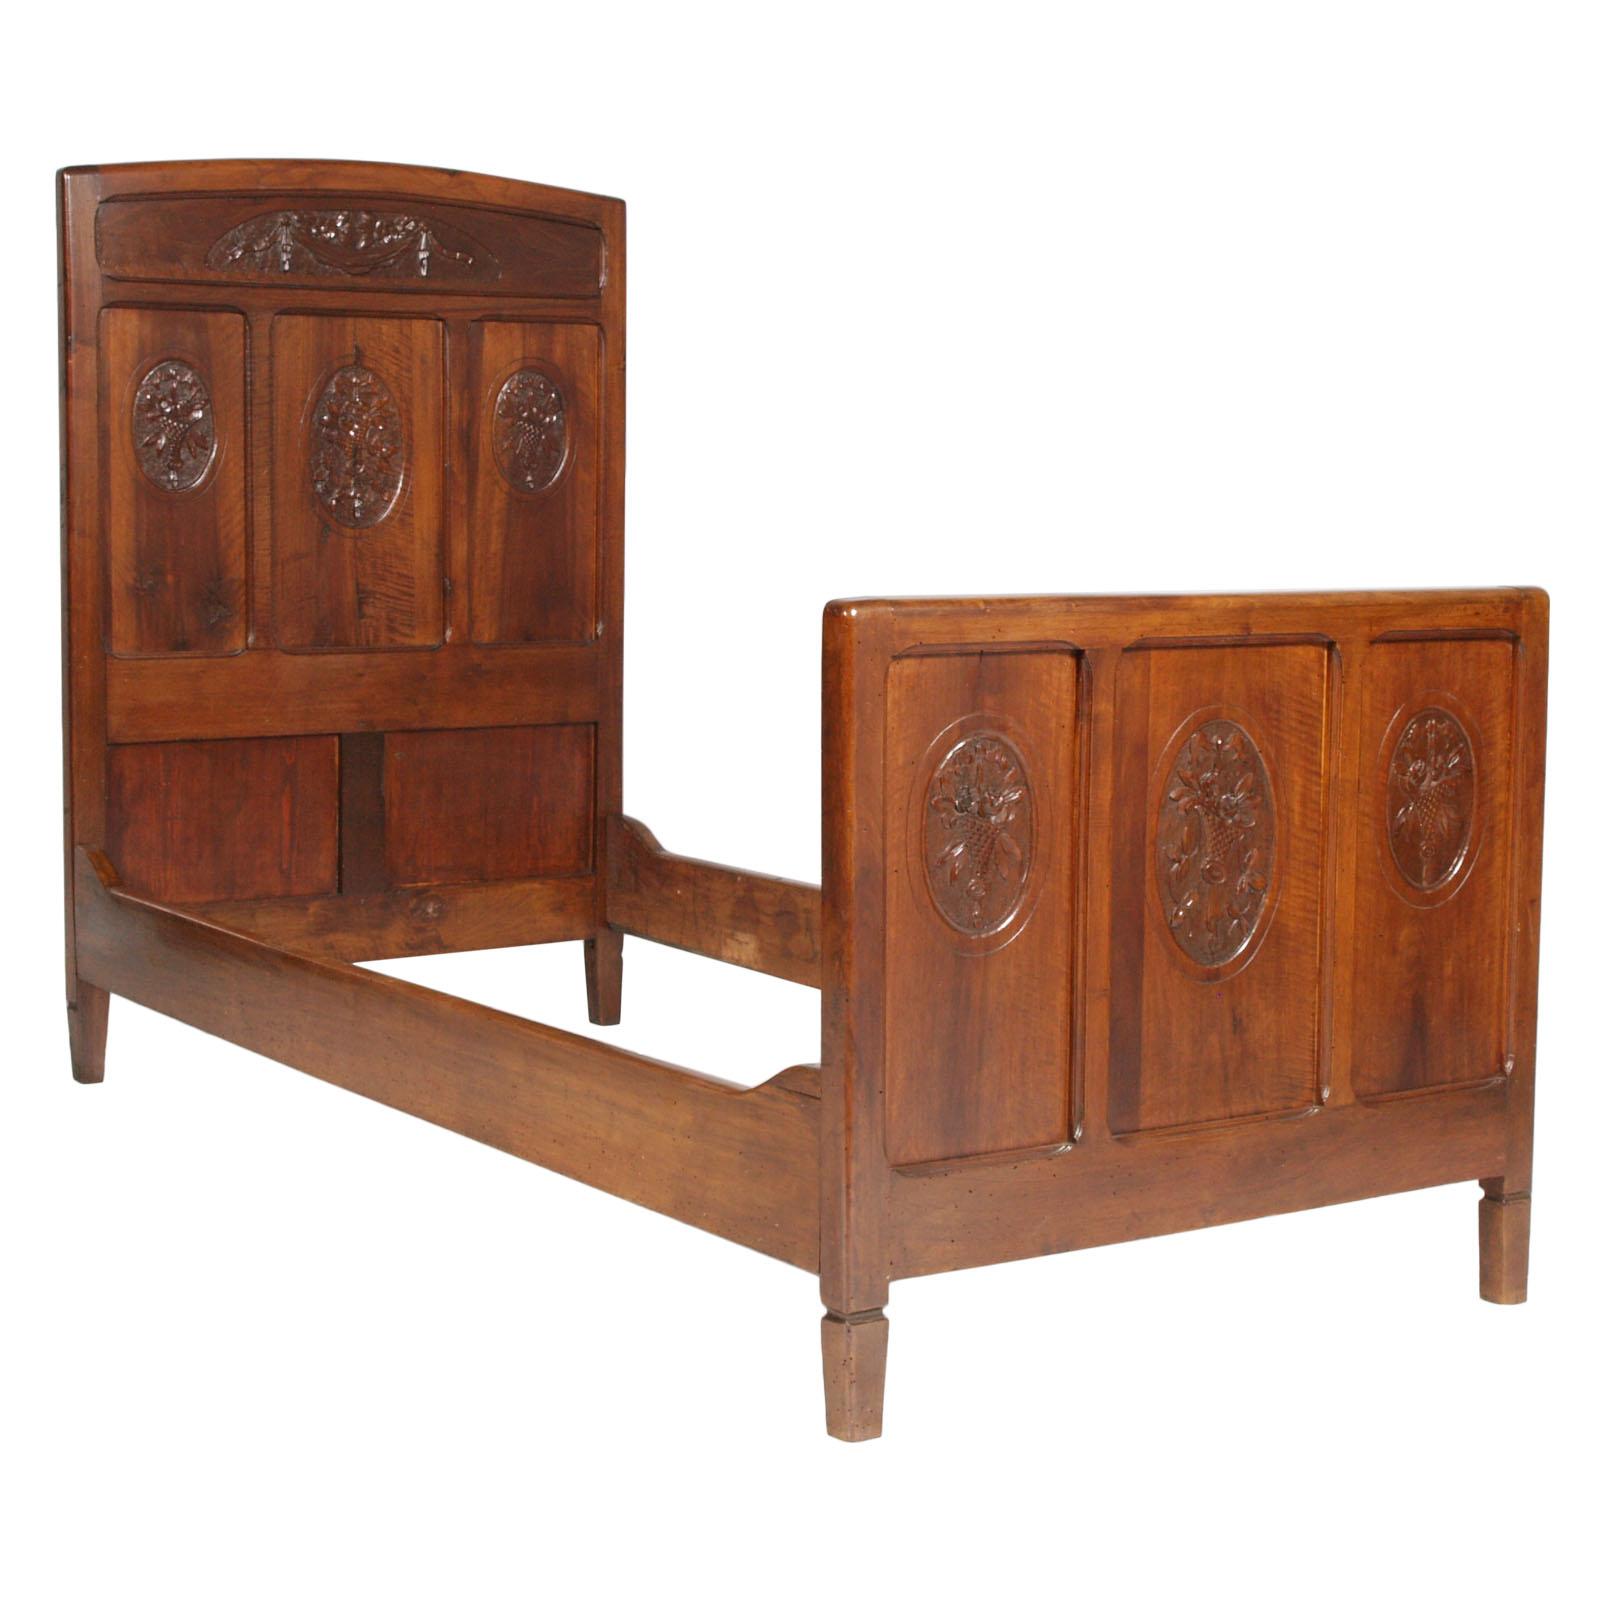 Art Nouveau pair of twin beds, Italy, circa 1890. Hand carved walnut, restored and polished to wax

of the same bedroom we have the chest of drawers, marble top, with beveled mirror and a Bedside Table.

Measures cm: H 140, W 95, D 200.